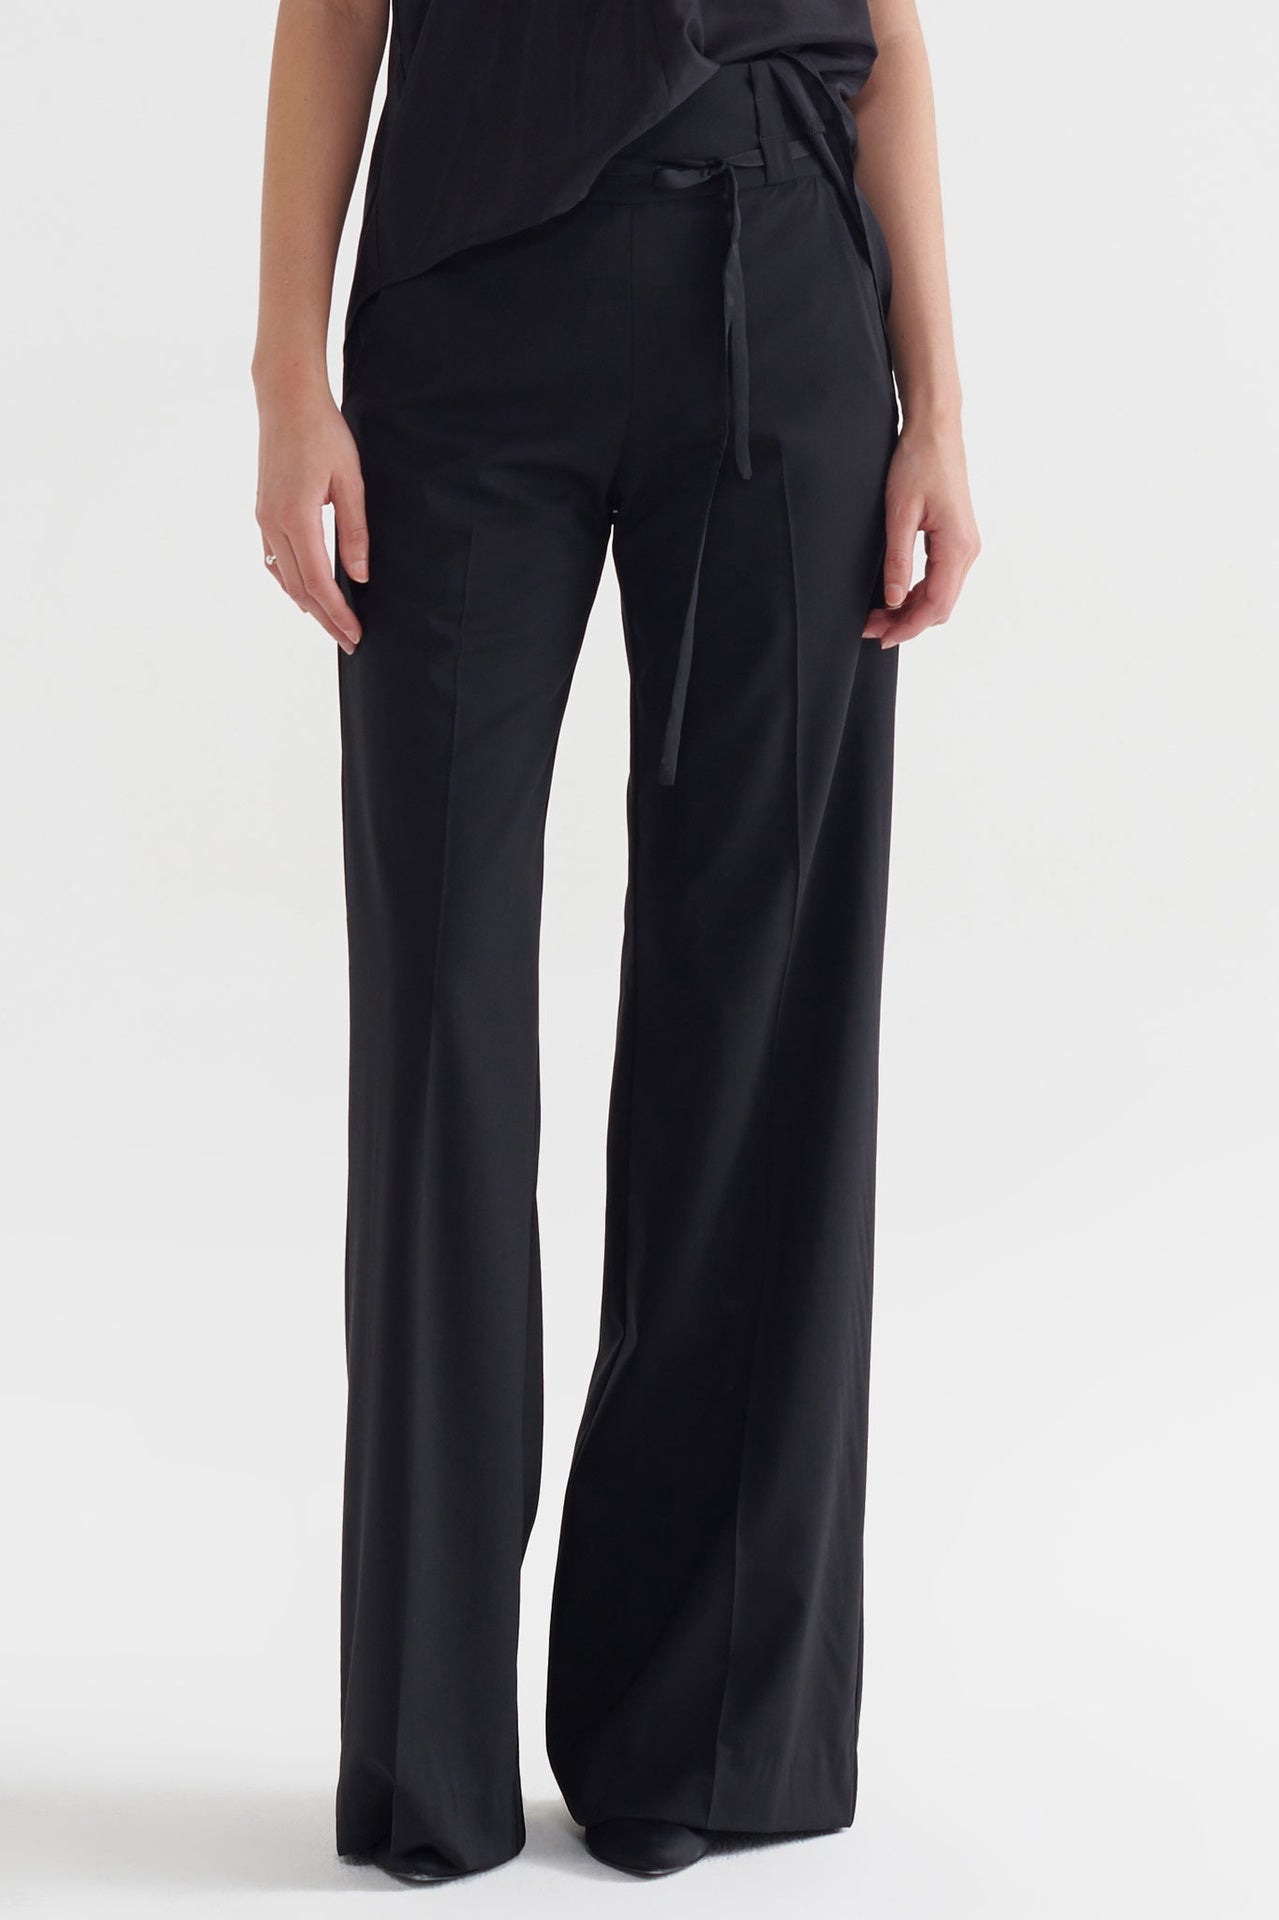 Introduction Pant - Black in Black - Taylor